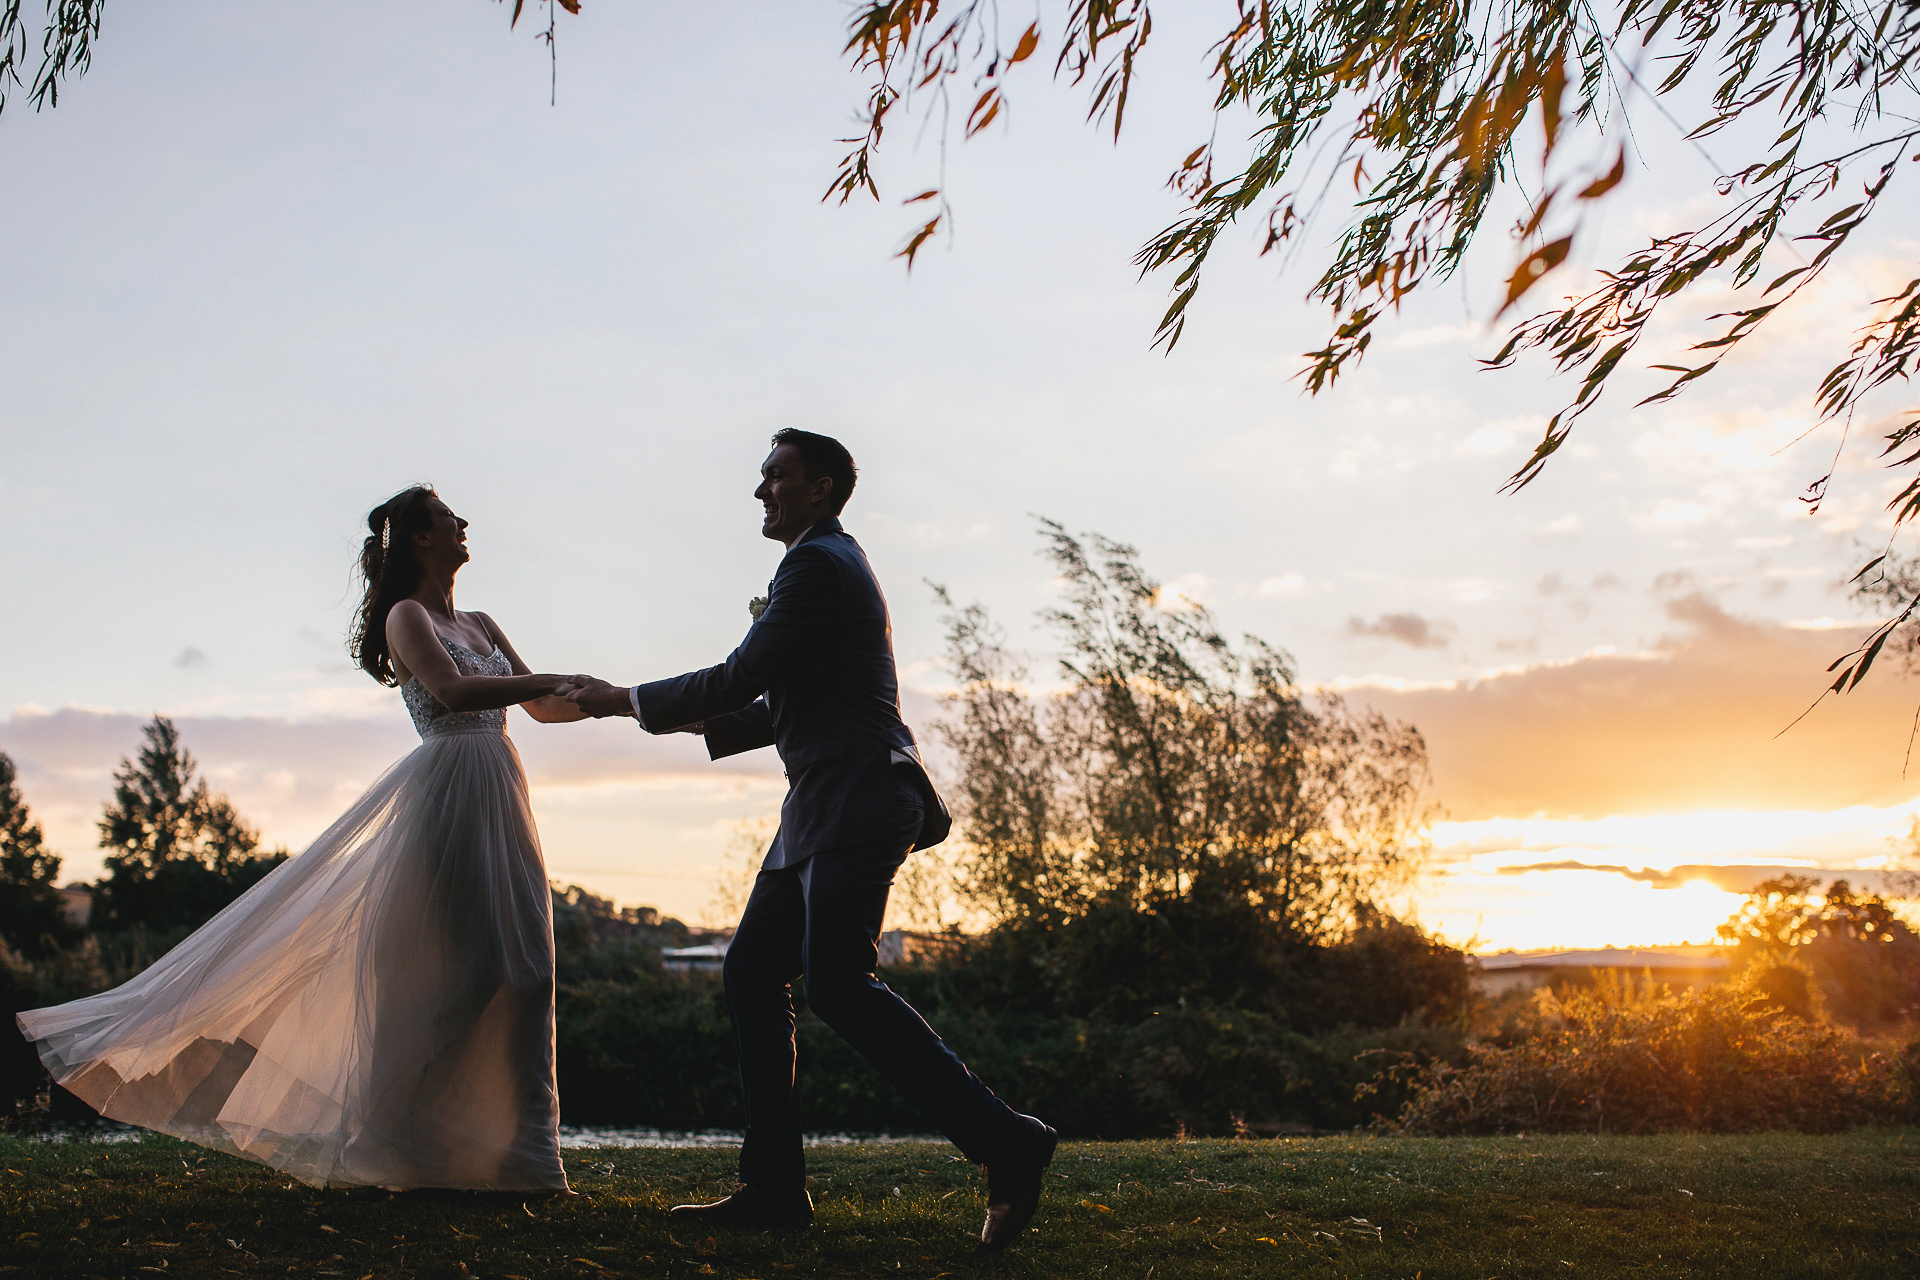 Bride and groom twirling joyfully around in a sunset